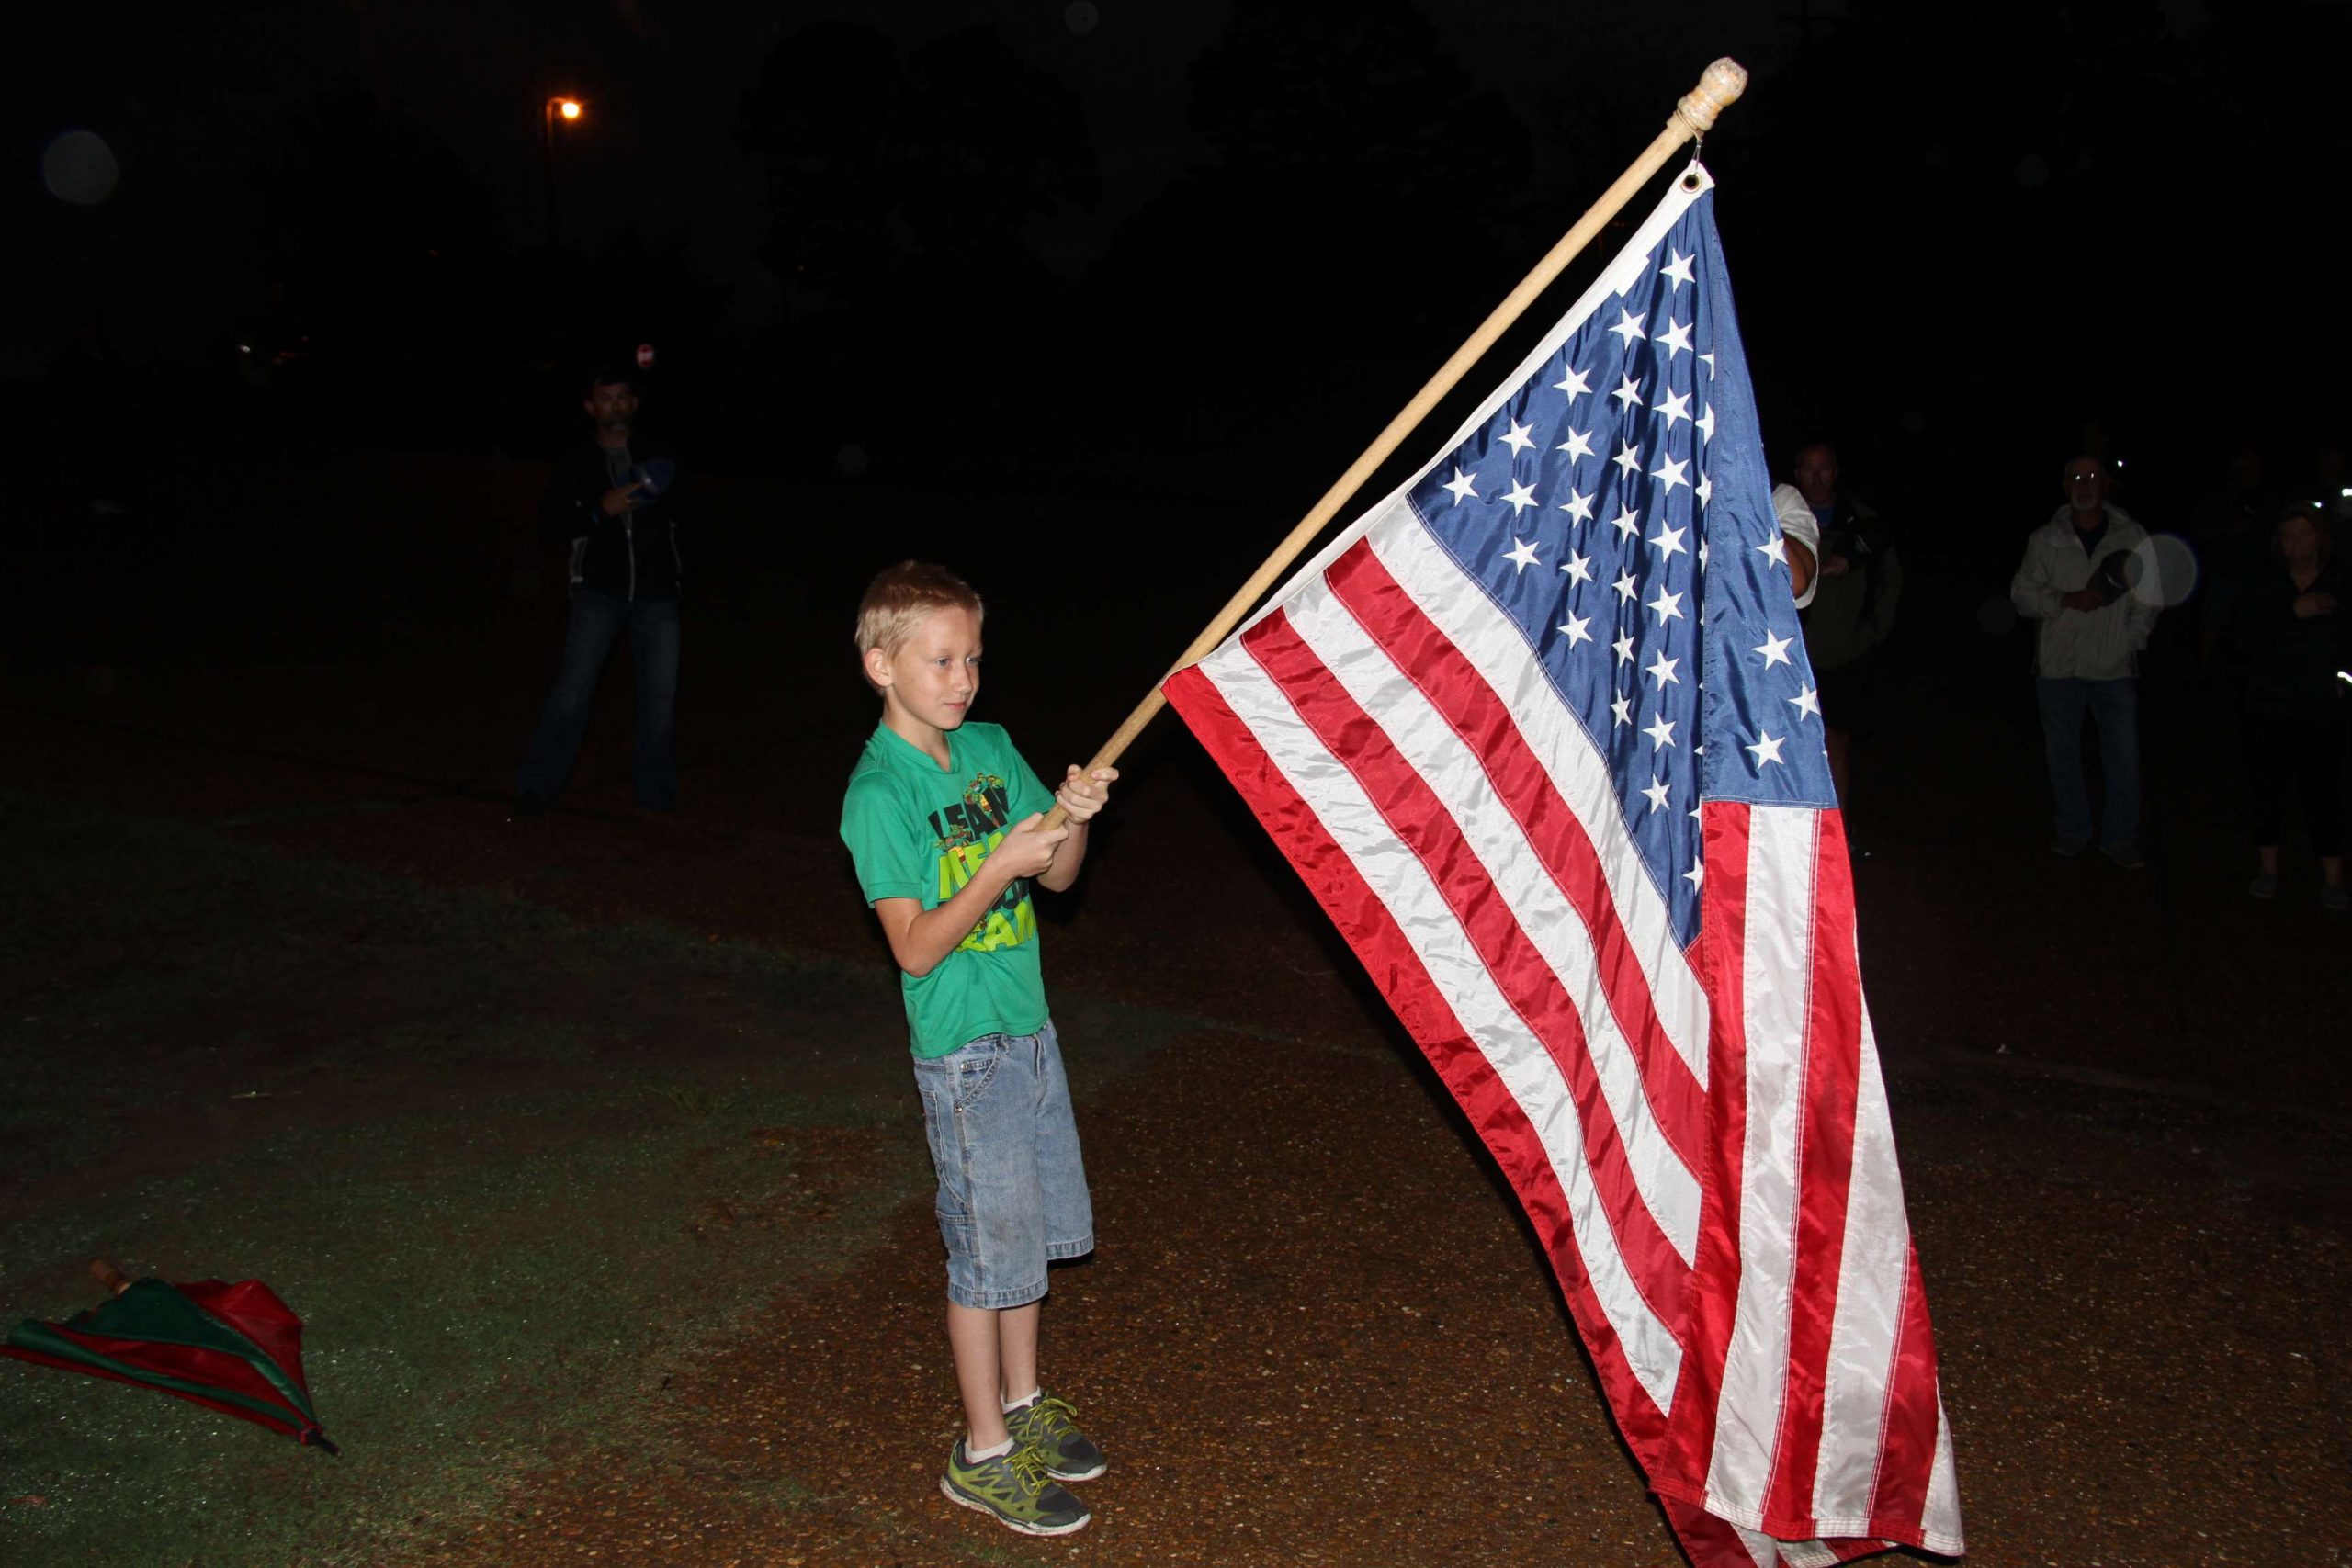 Nathan King, 8, of West Monroe, La., has the honor of holding the flag during the National Anthem on the second day.